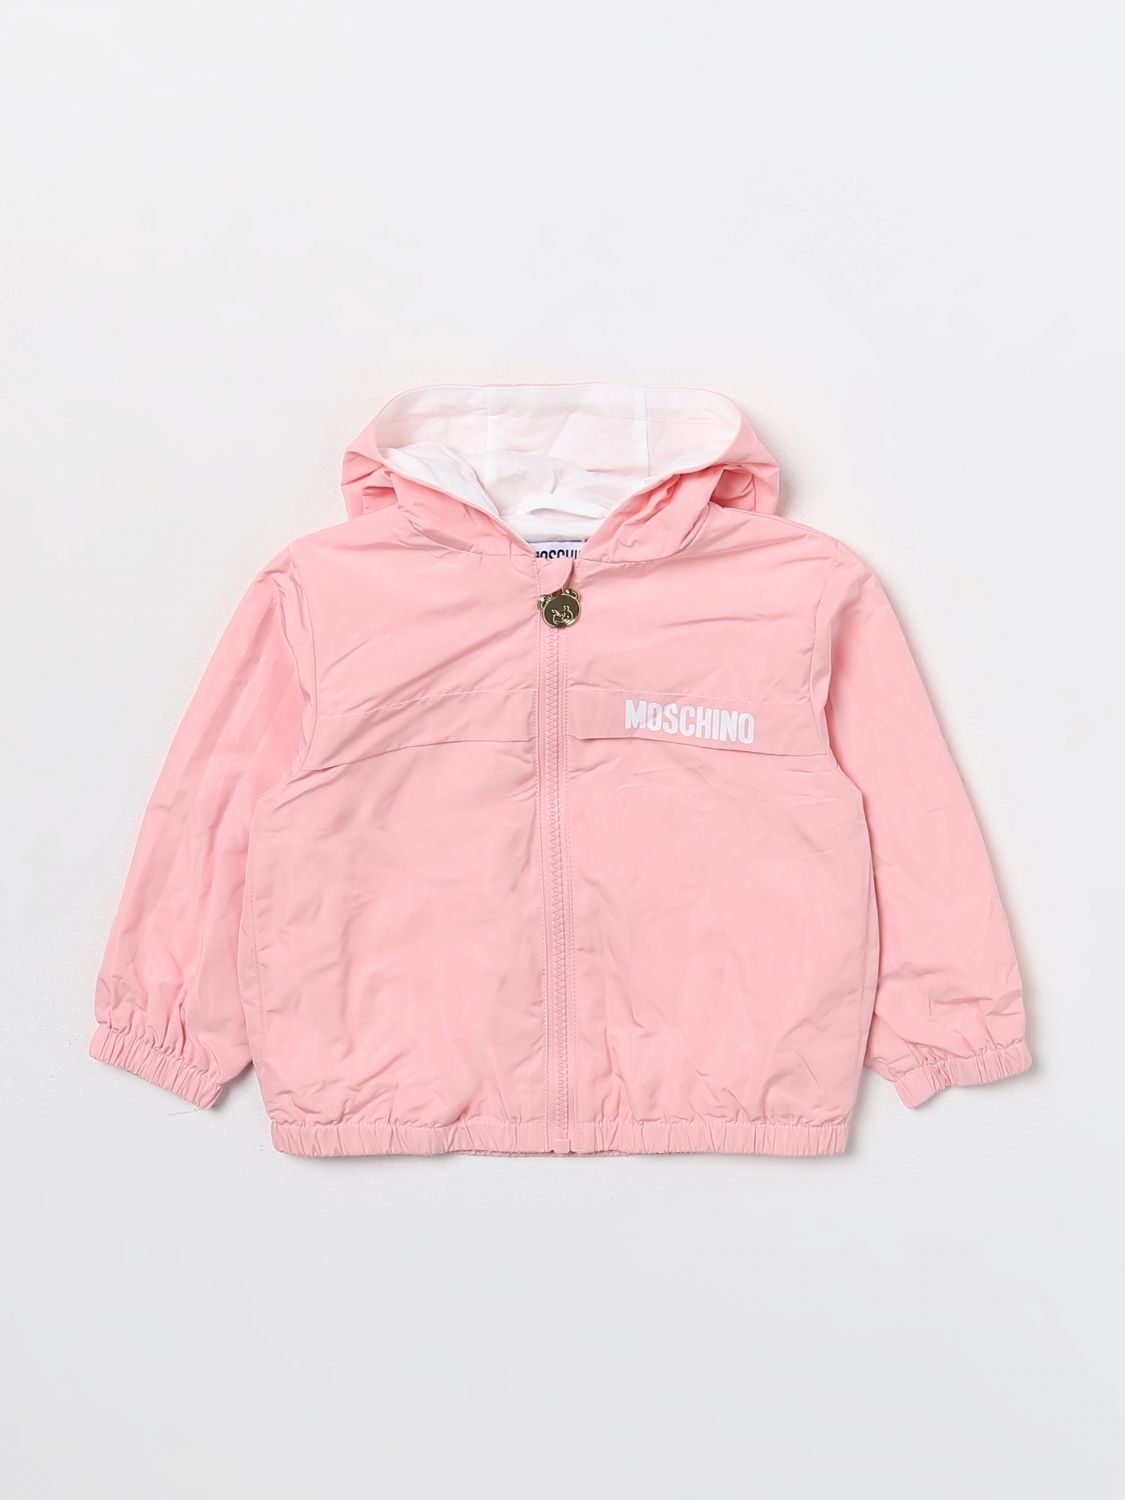 Moschino Baby Jacket  Kids Color Pink